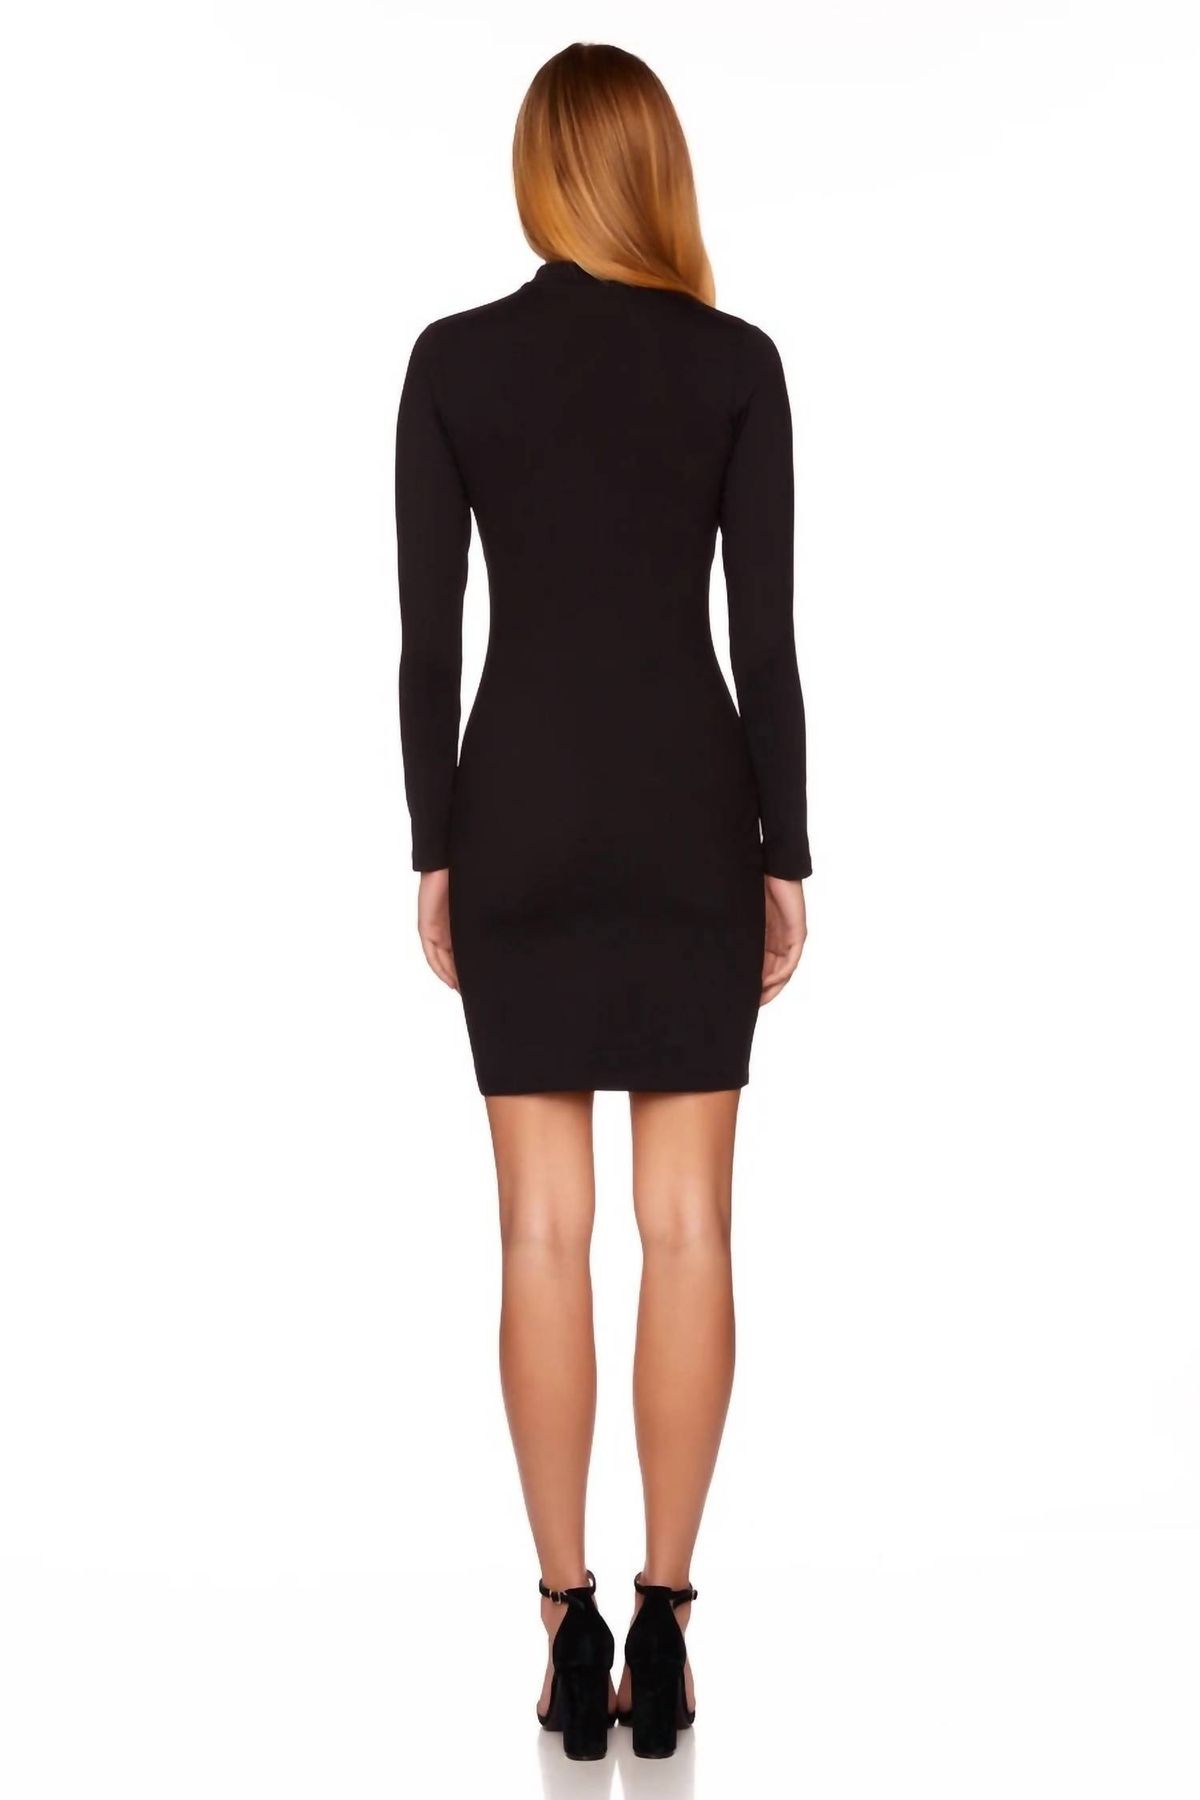 Style 1-2468962233-3899 Susana Monaco Size XS Long Sleeve Black Cocktail Dress on Queenly